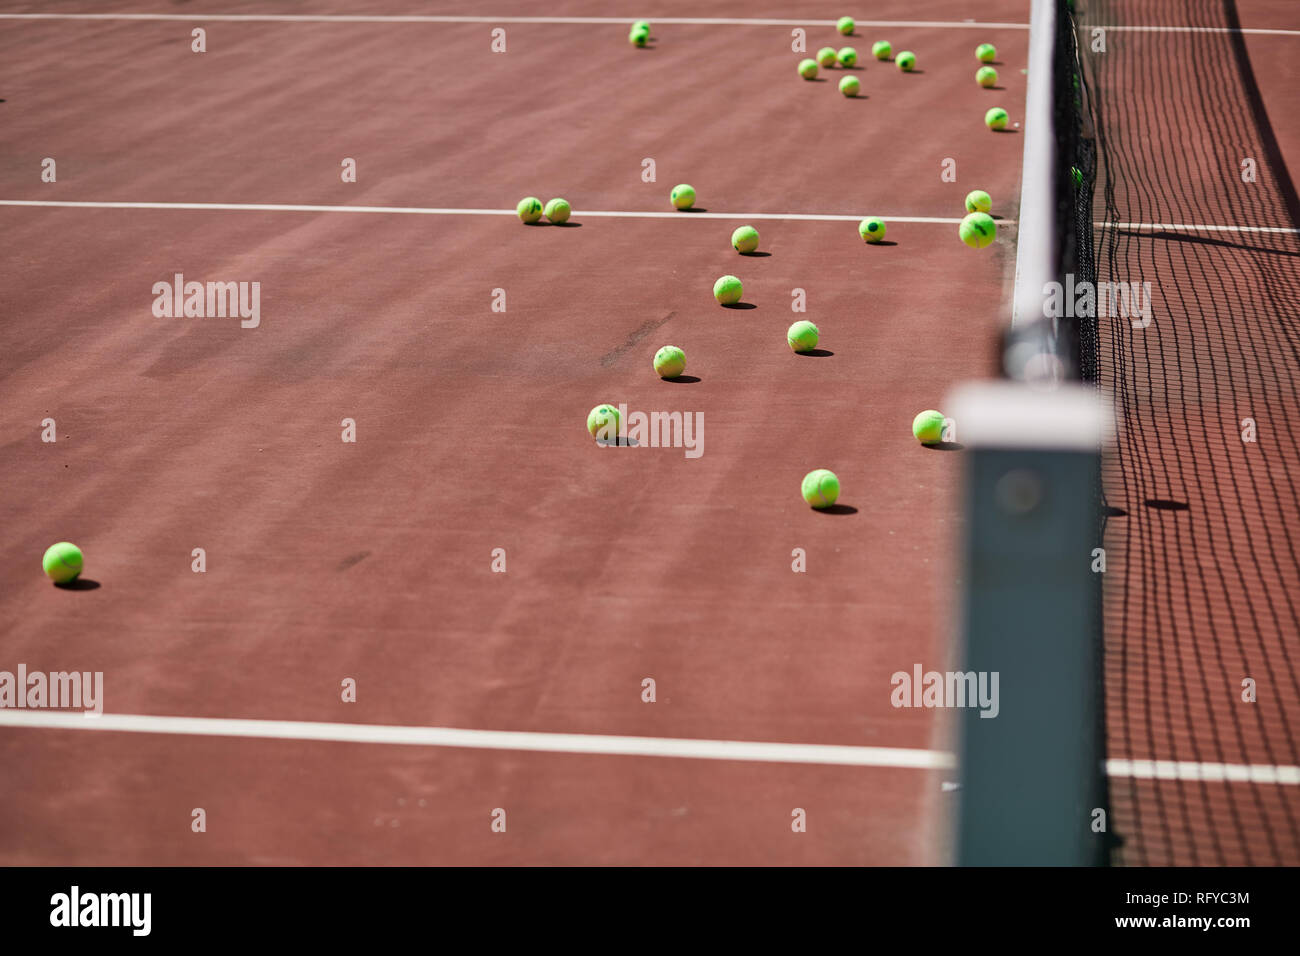 Red-clay tennis court with sport equipment and tennis balls on it. Stock Photo